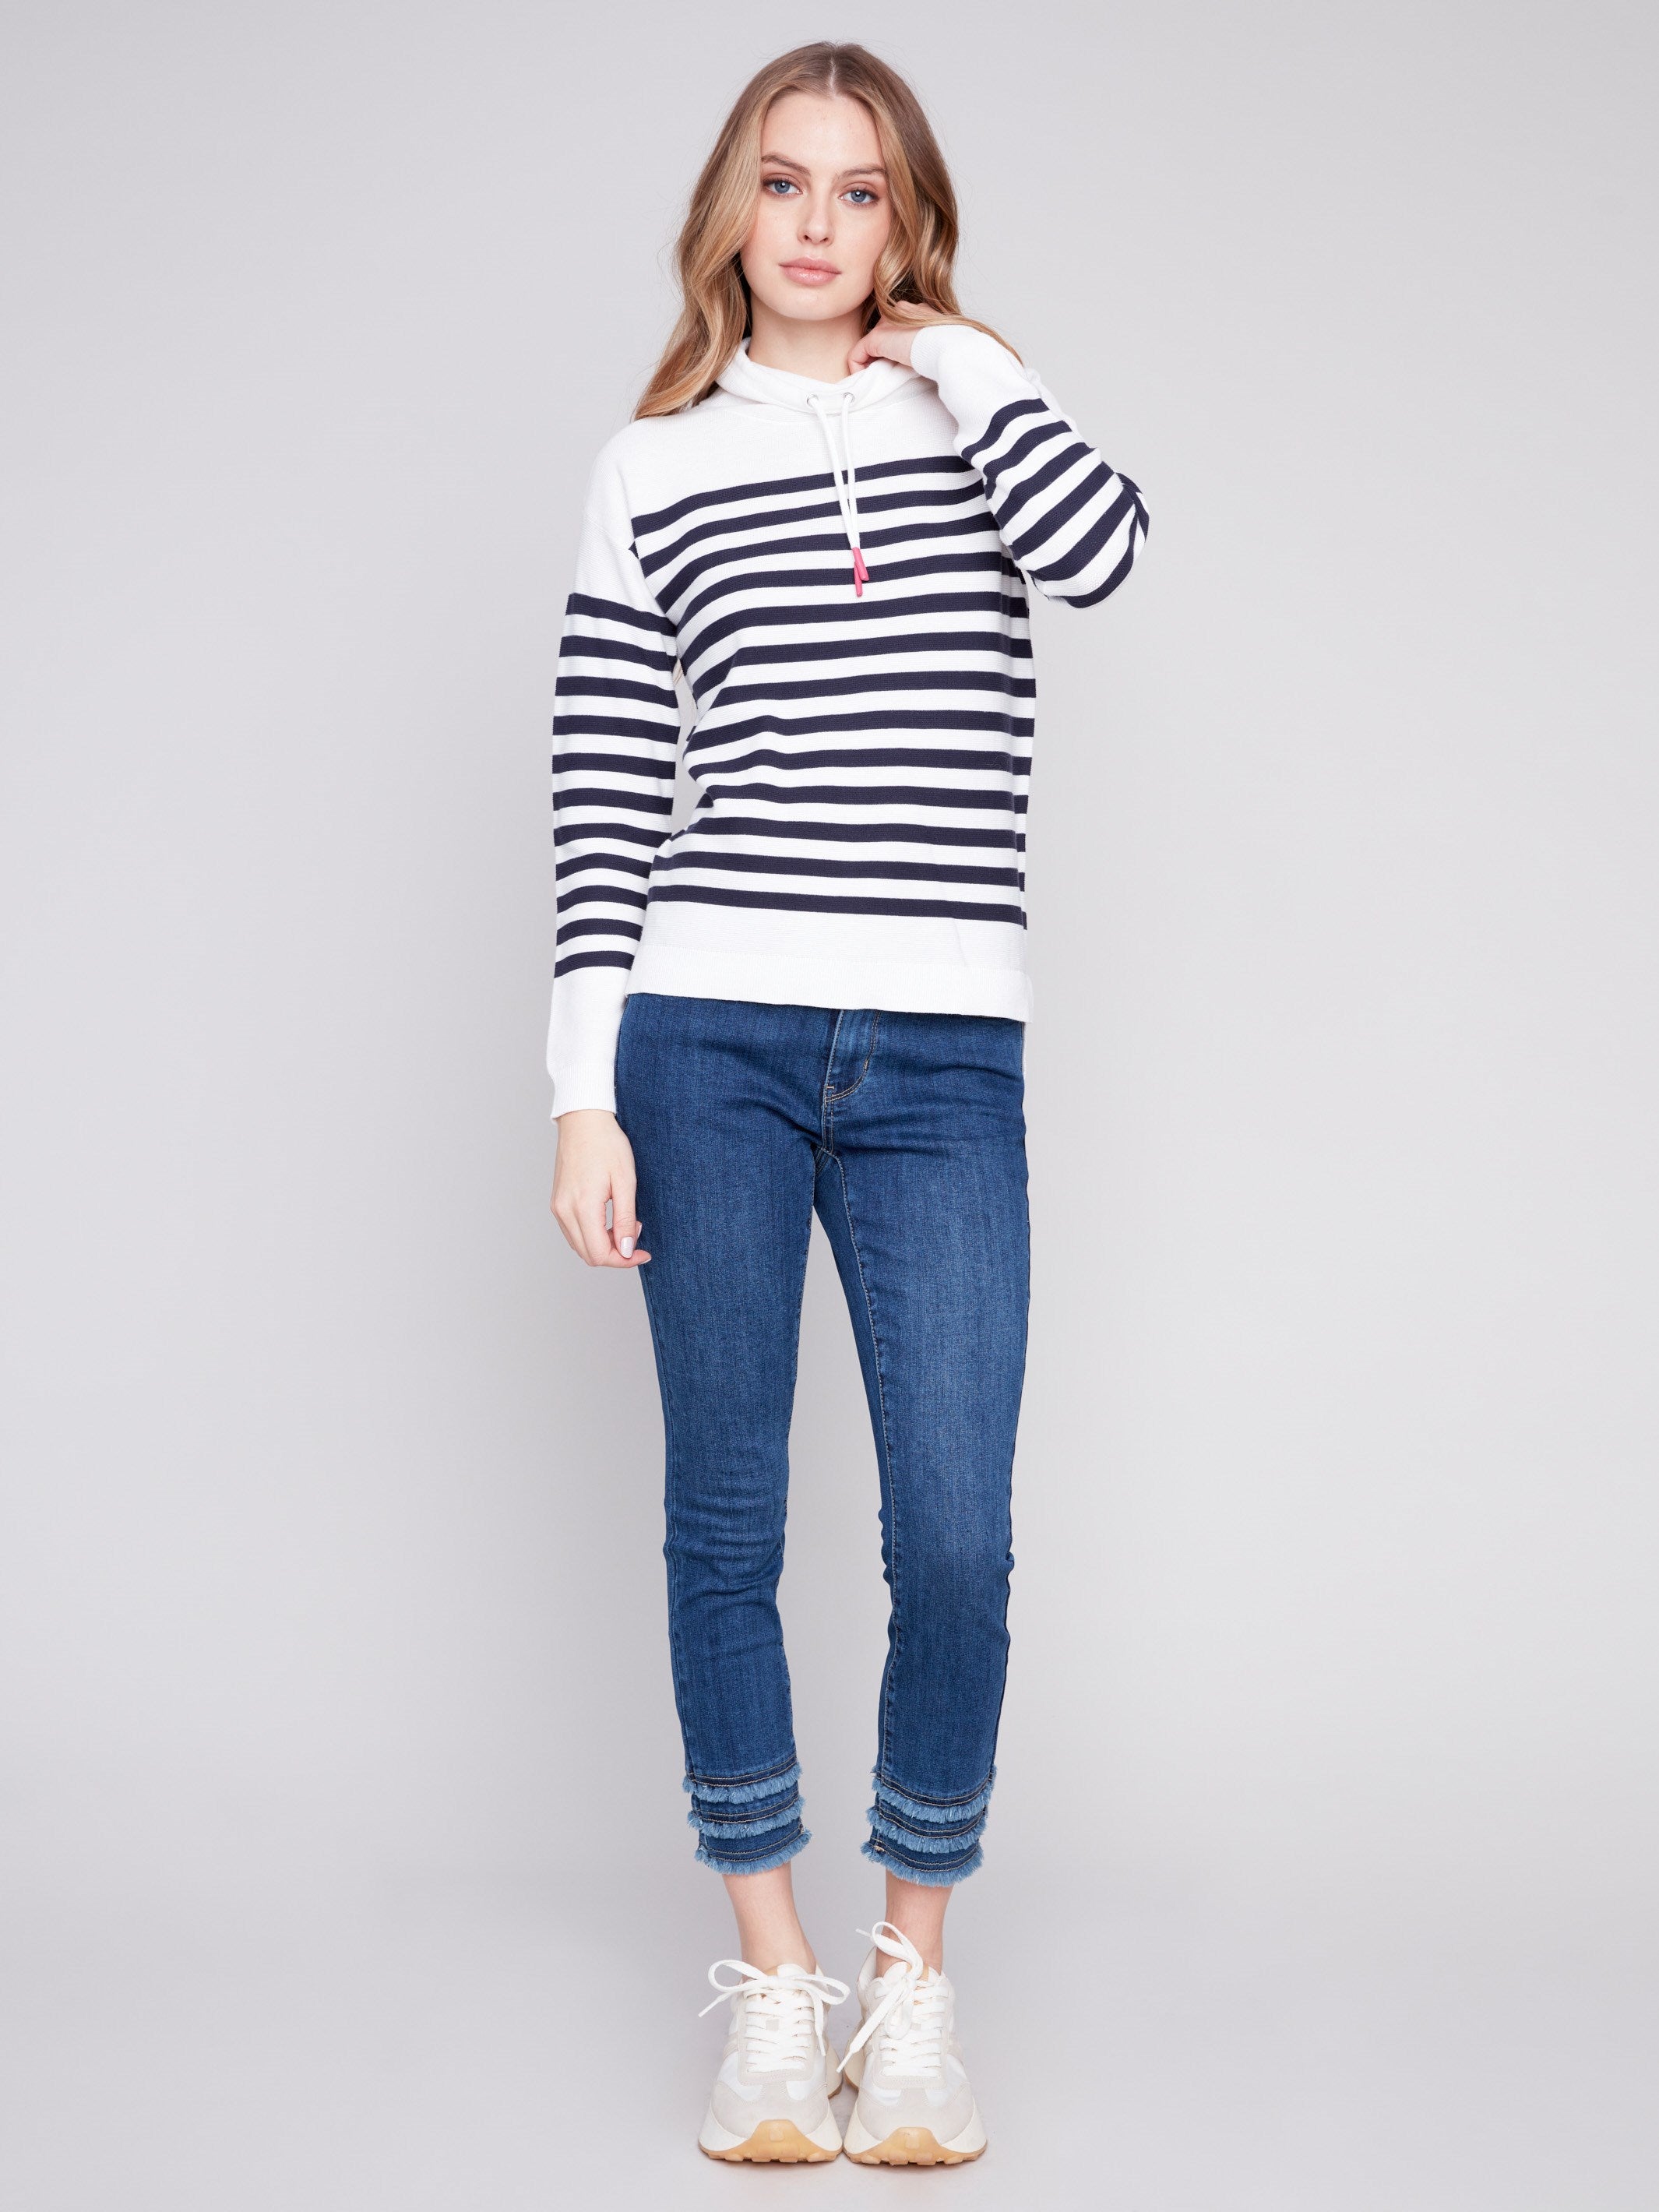 Ottoman Cotton Funnel Neck Sweater - Nautical - Charlie B Collection Canada - Image 3